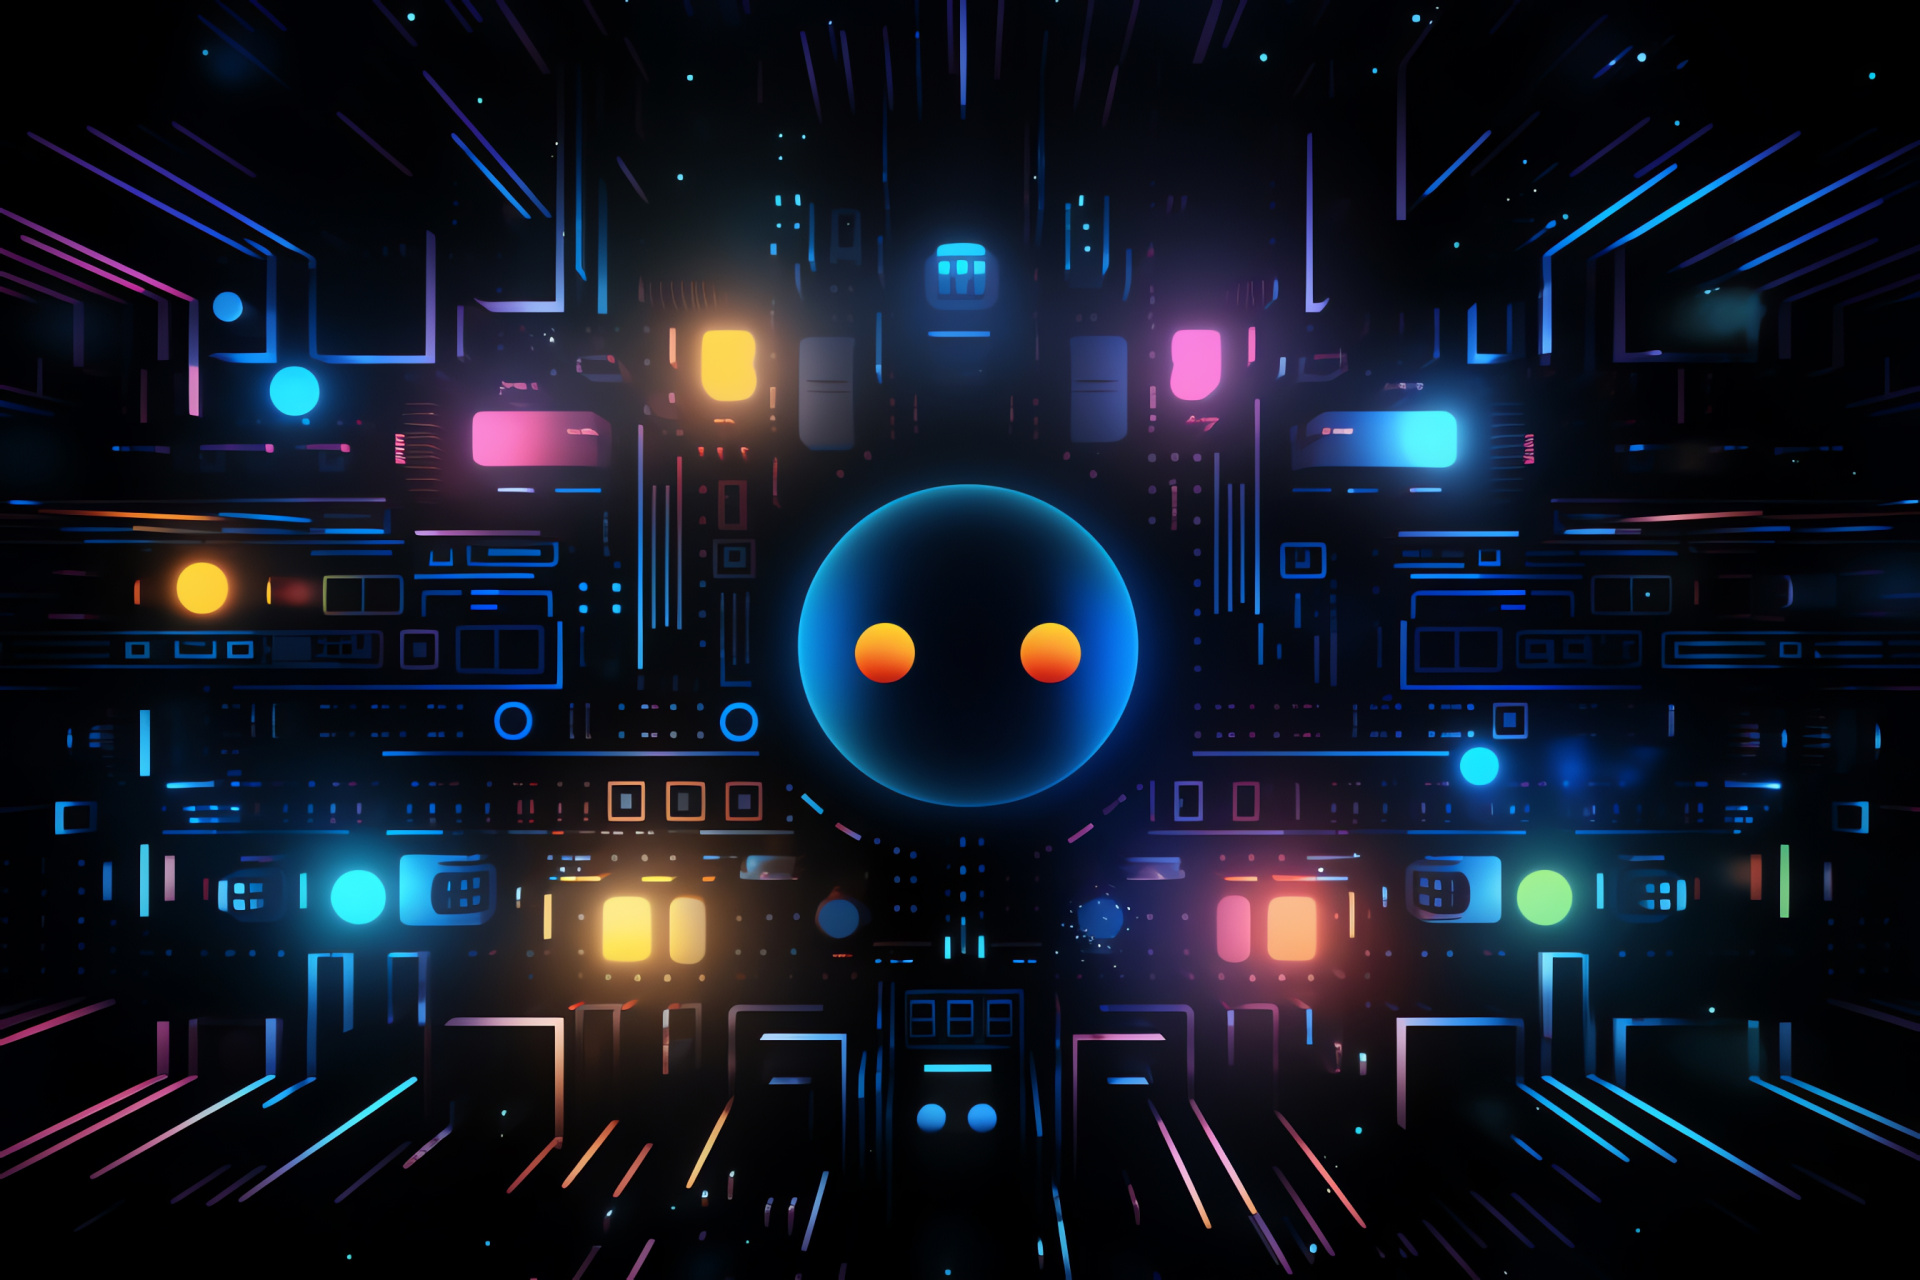 Pacman game icon, Classic arcade character, Bright yellow figure, Pac-world assignment, Legendary mouth opening, HD Desktop Wallpaper